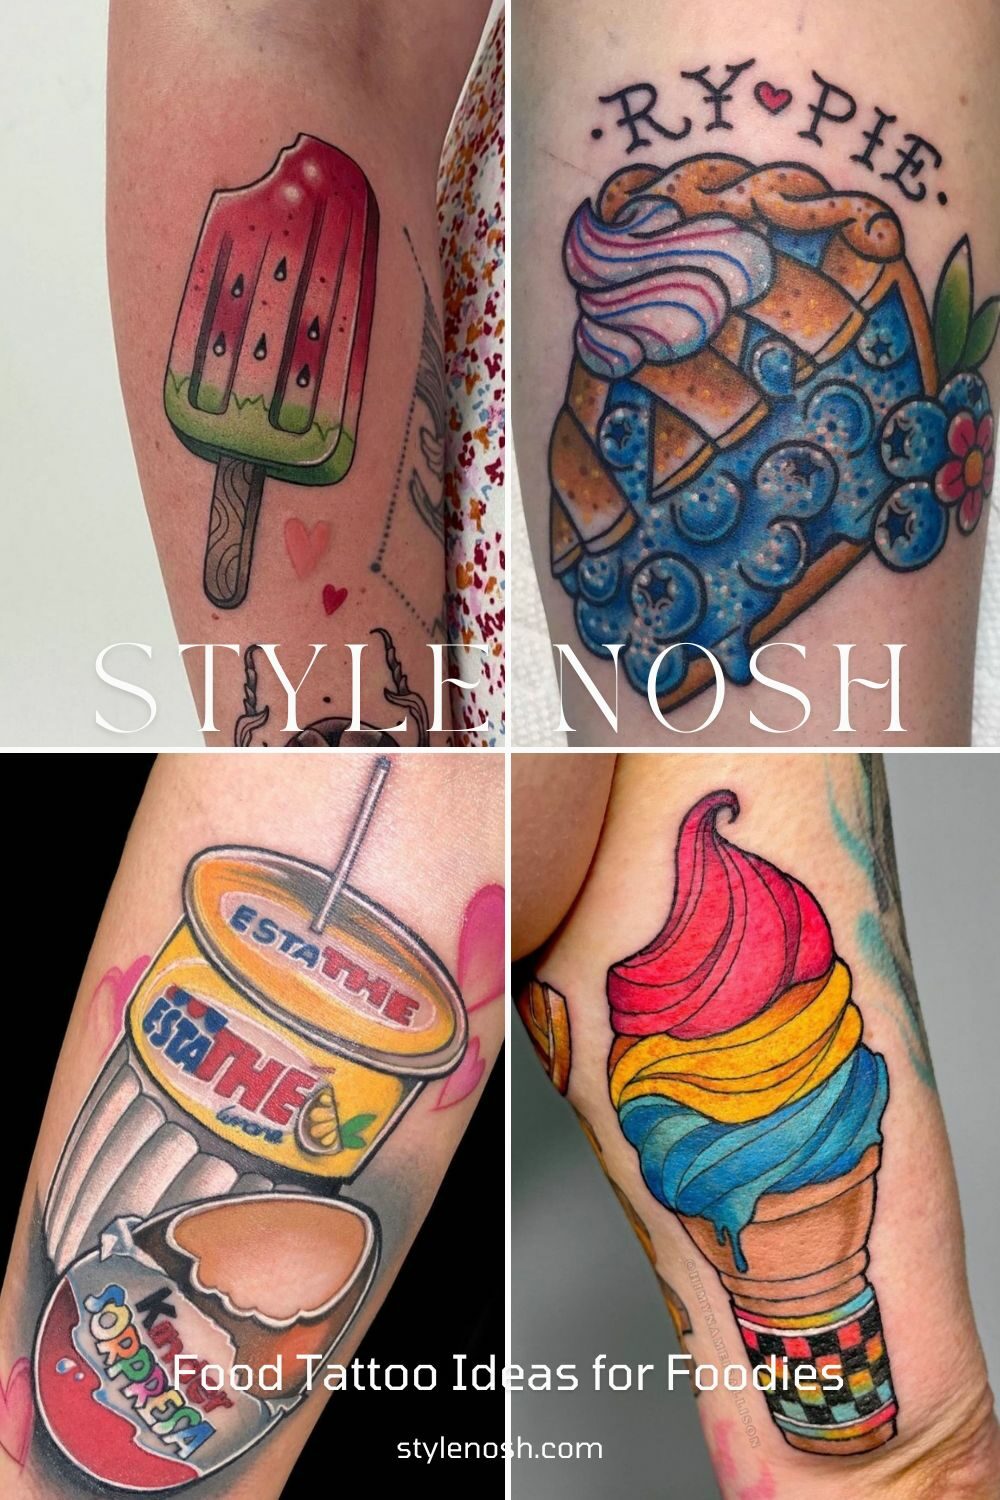 With a well balanced pattern and other aspects the food tattoos is exceptionally pleasing to the eye.